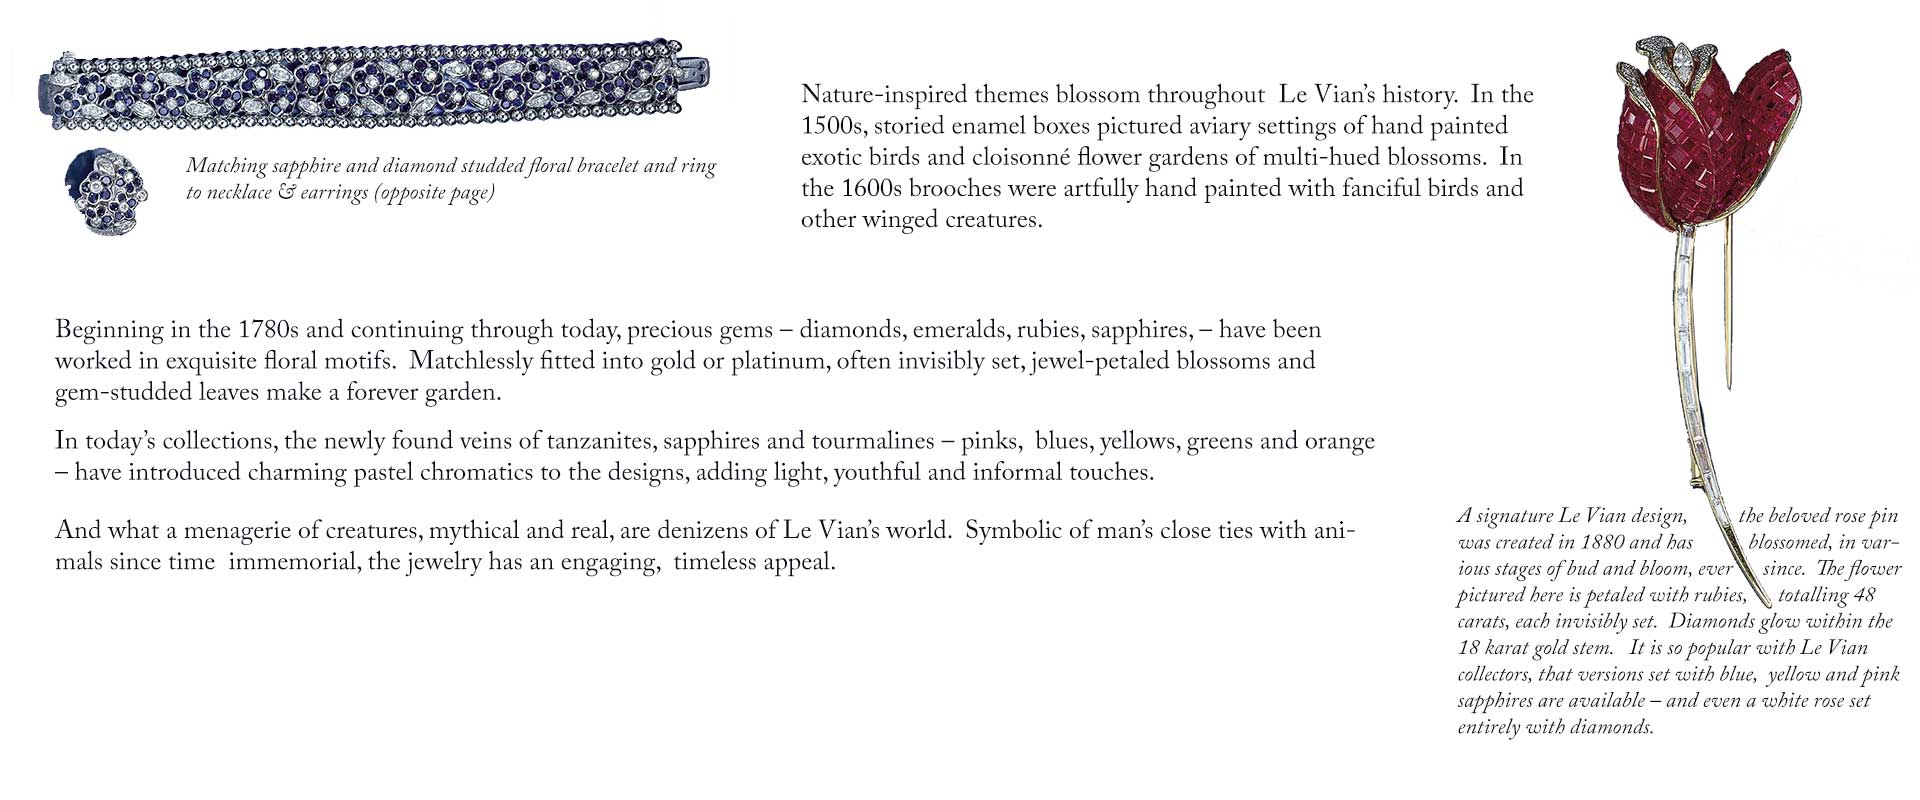 Matching sapphire and diamond studded floral bracelet and ring